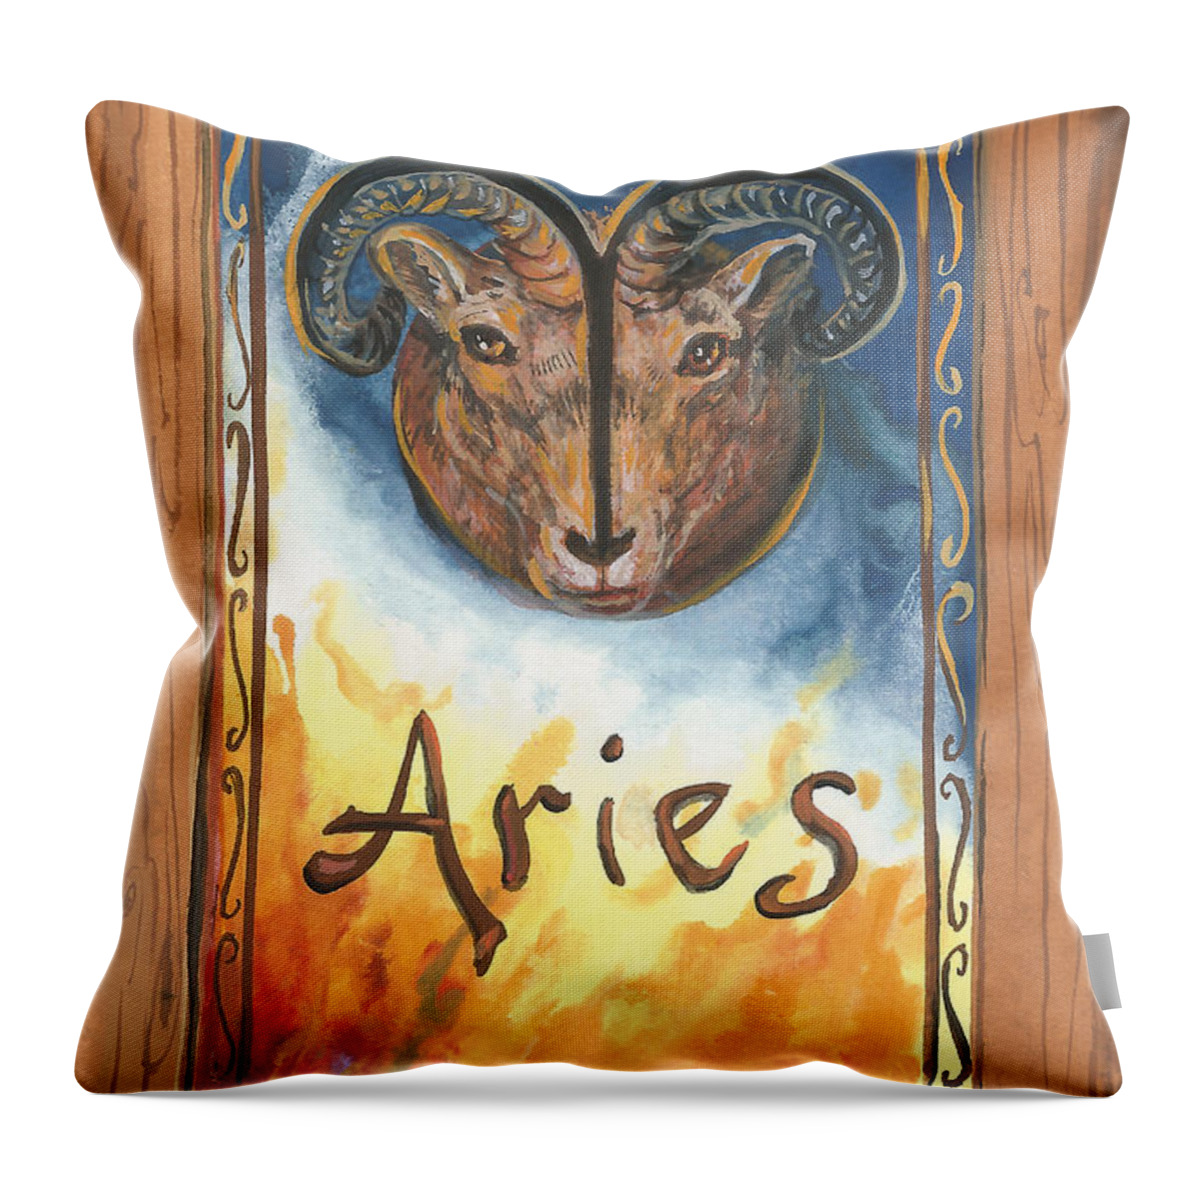 My Aries Throw Pillow featuring the painting My Aries by Sheri Jo Posselt